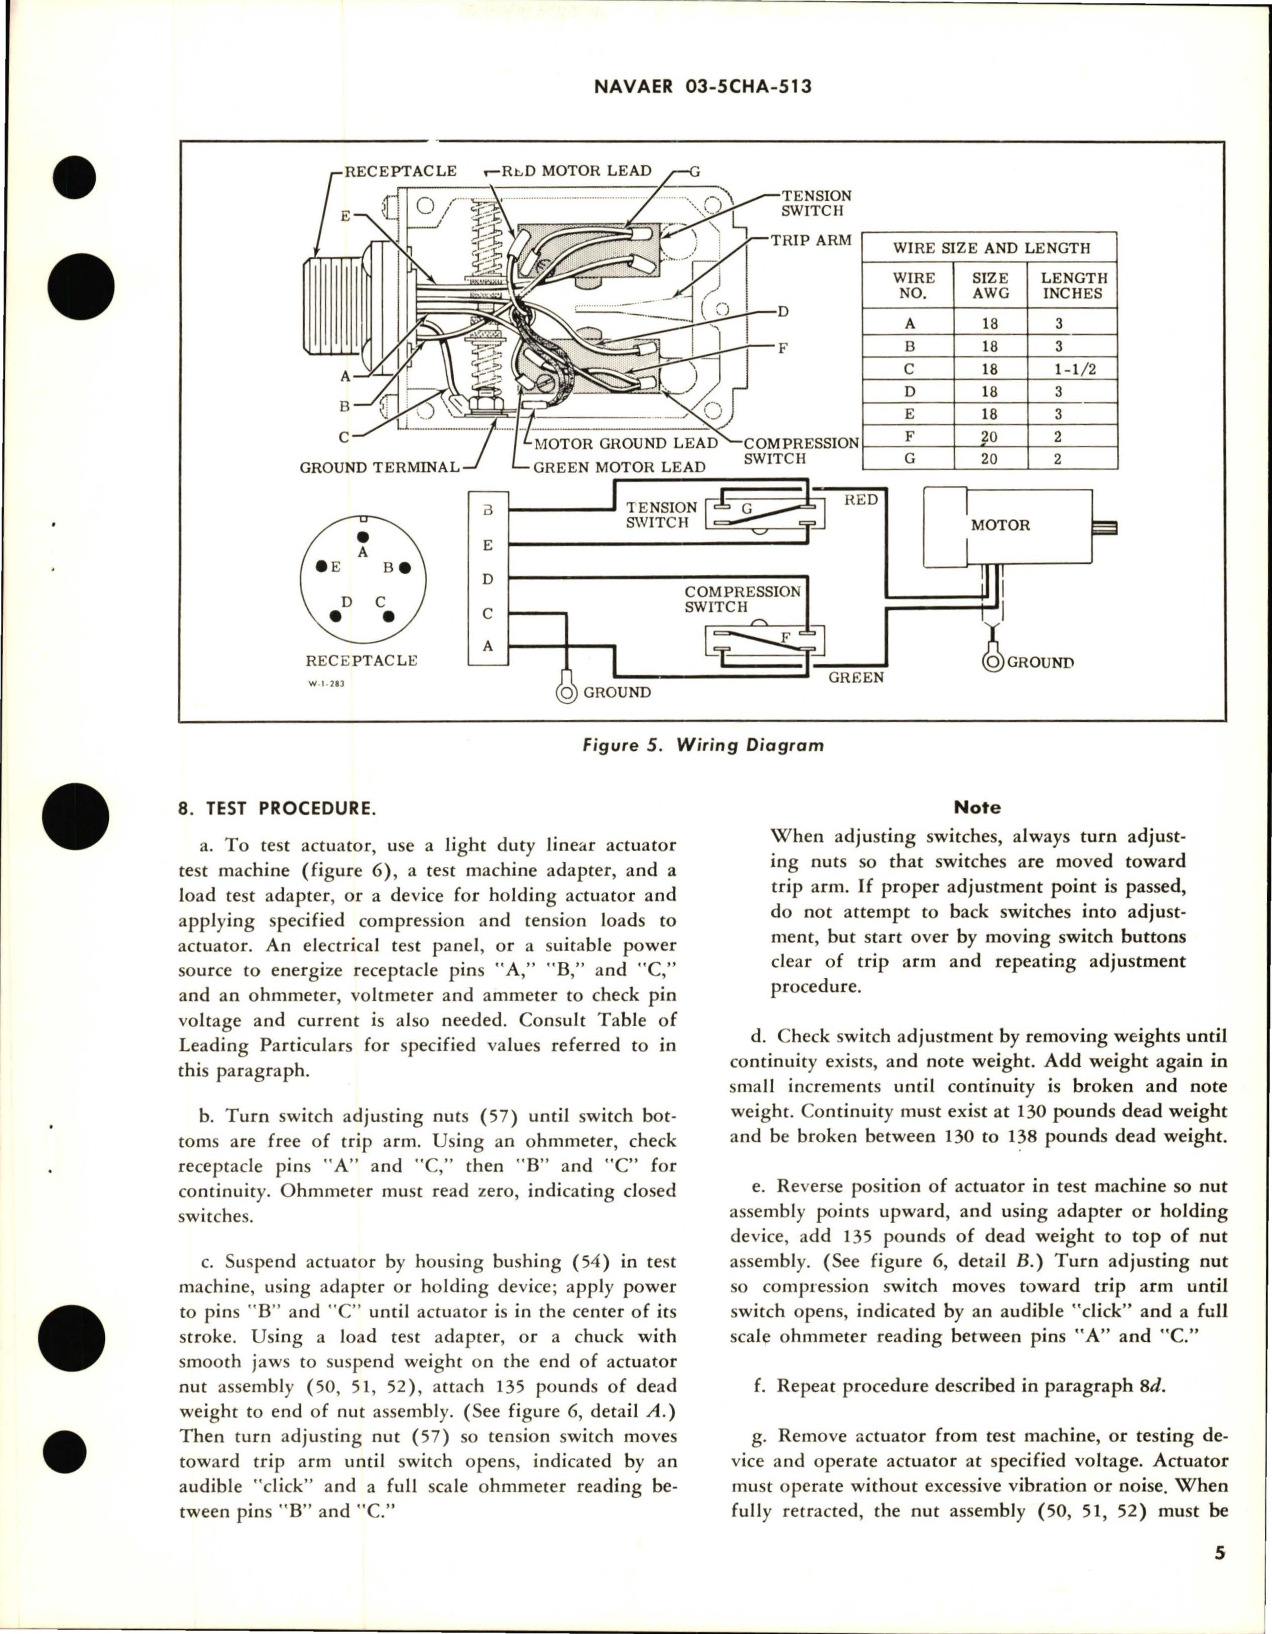 Sample page 5 from AirCorps Library document: Overhaul Instructions with Parts Breakdown for Electromechanical Linear Actuator - Part 31964-120 - Model ELL1-408 